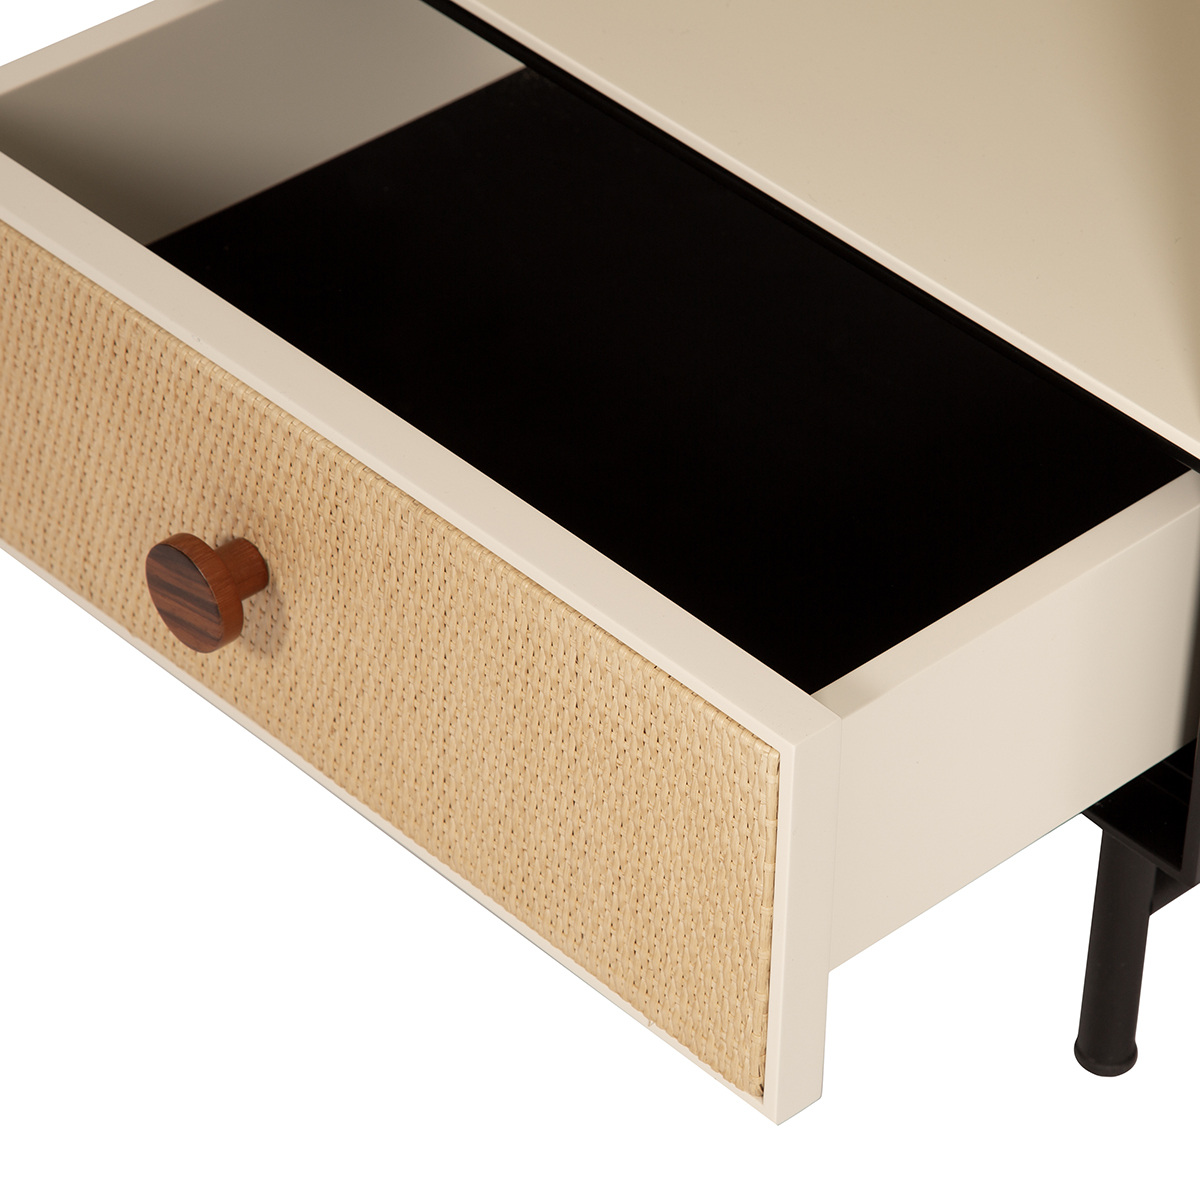 Bedside Table Essence, Black / Ivory - LL55 x W38 x H55 cm - Lacquered wood - image 3